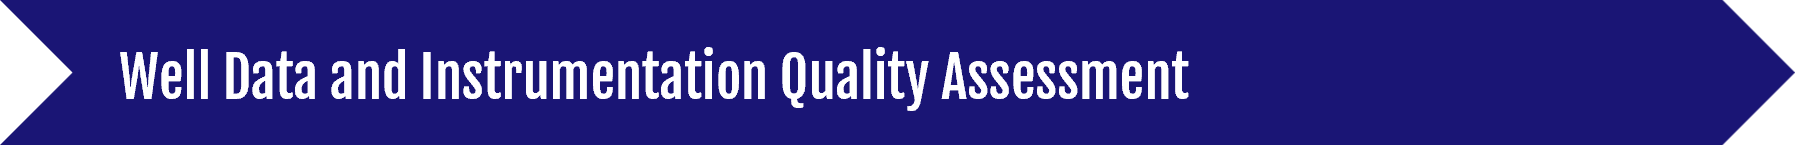 Well Data and Instrumentation Quality Assessment Header